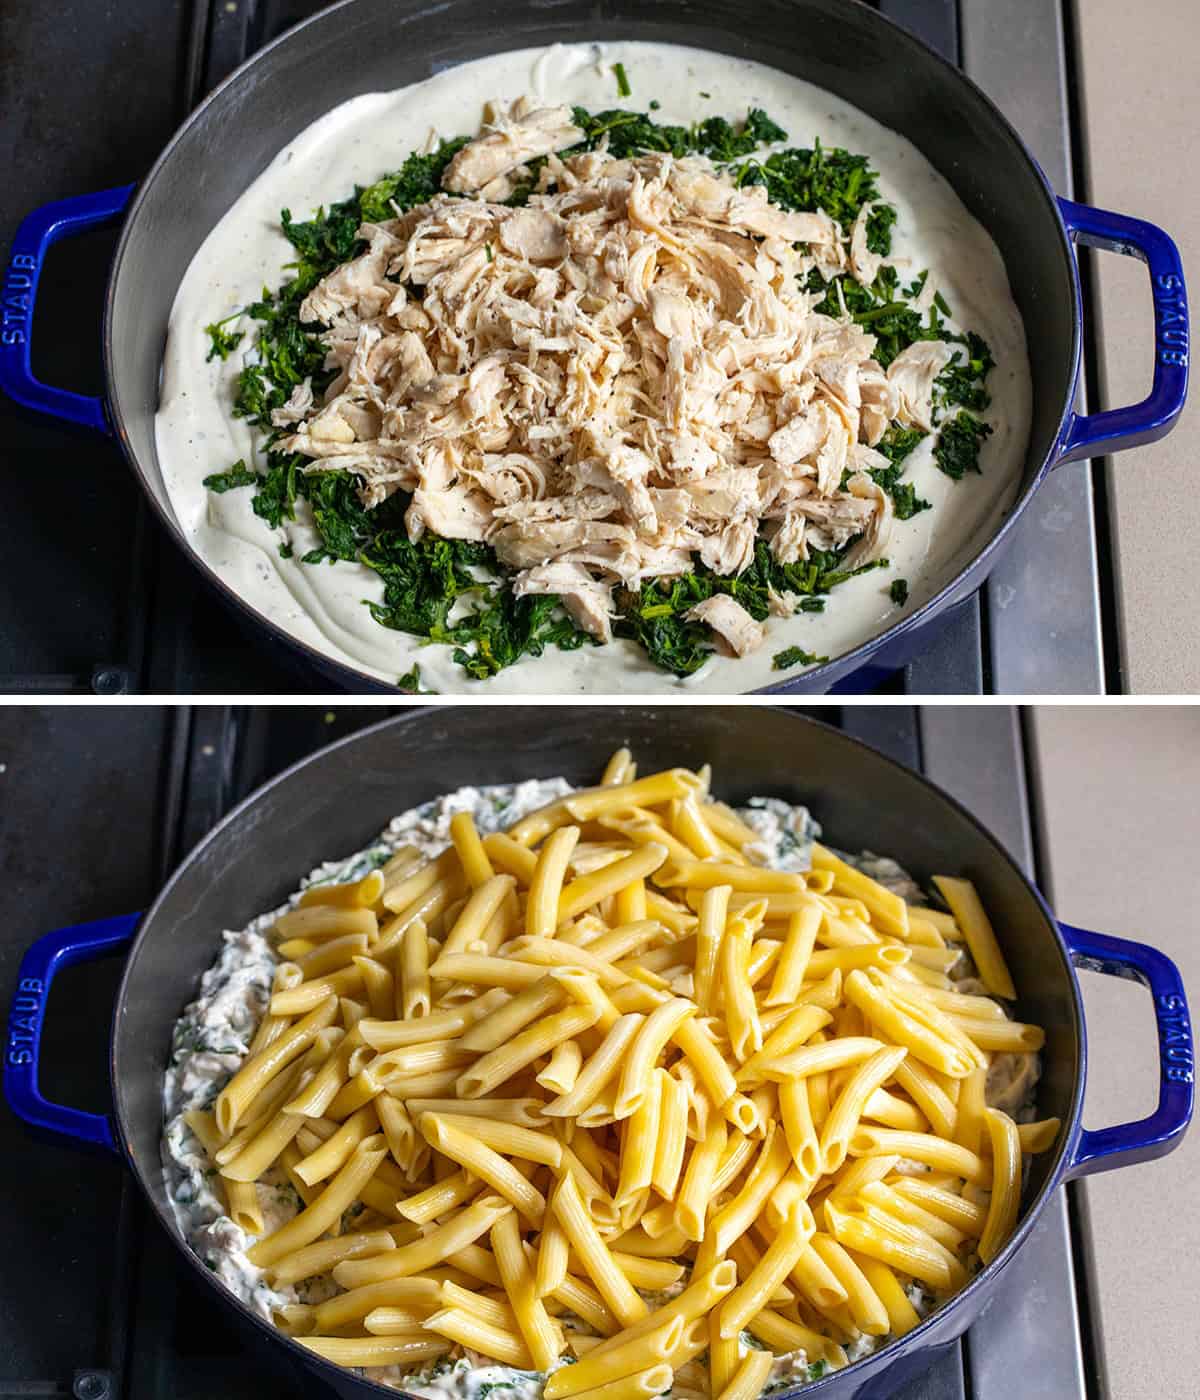 Steps for making Spinach Dip Chicken Pasta in a skillet with sauce, spinach, chicken, and noodles.